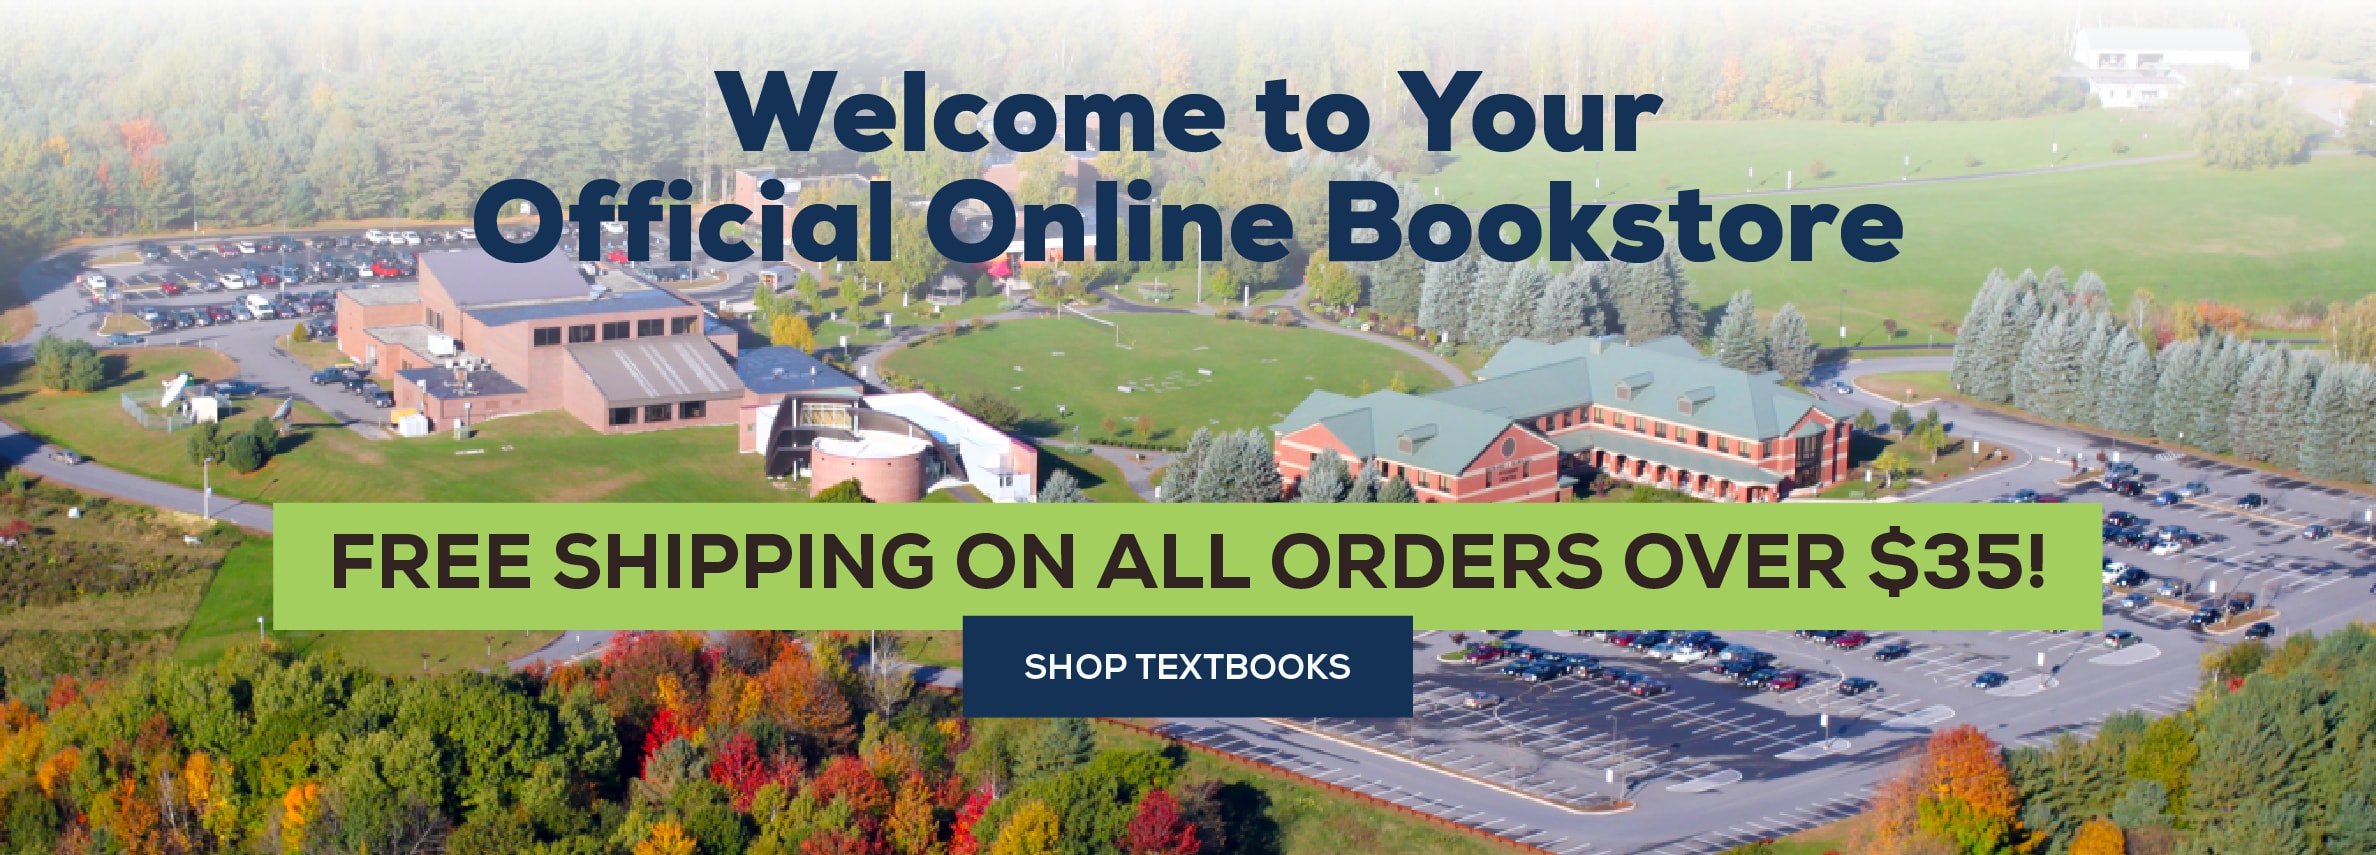 Welcome to your official online bookstore. Free shipping on all orders over $35! Shop textbooks (new tab)